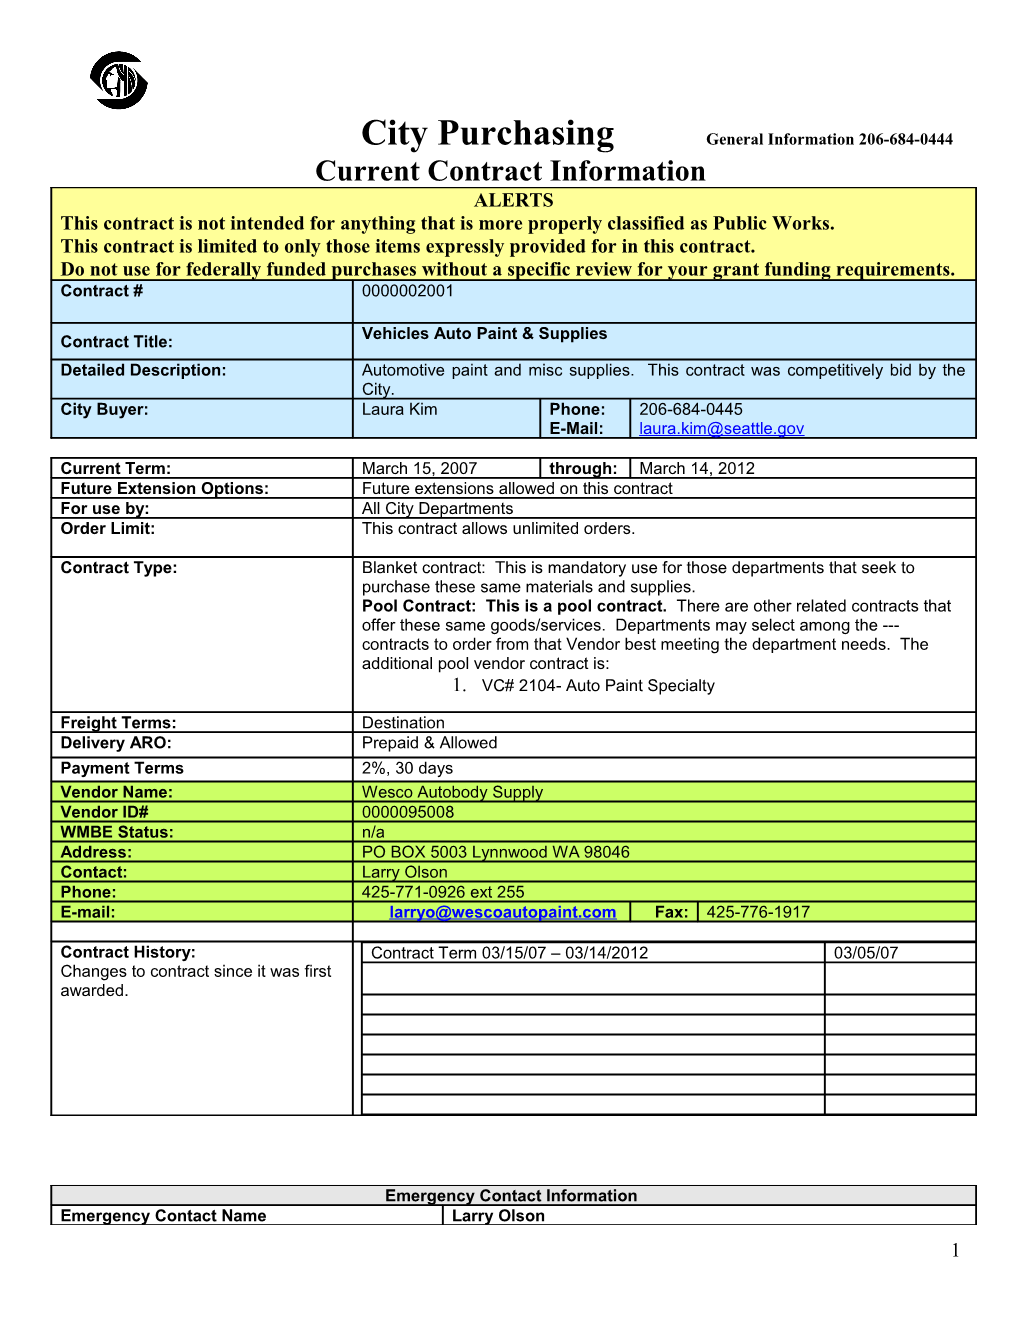 Current Contract Information Form s29